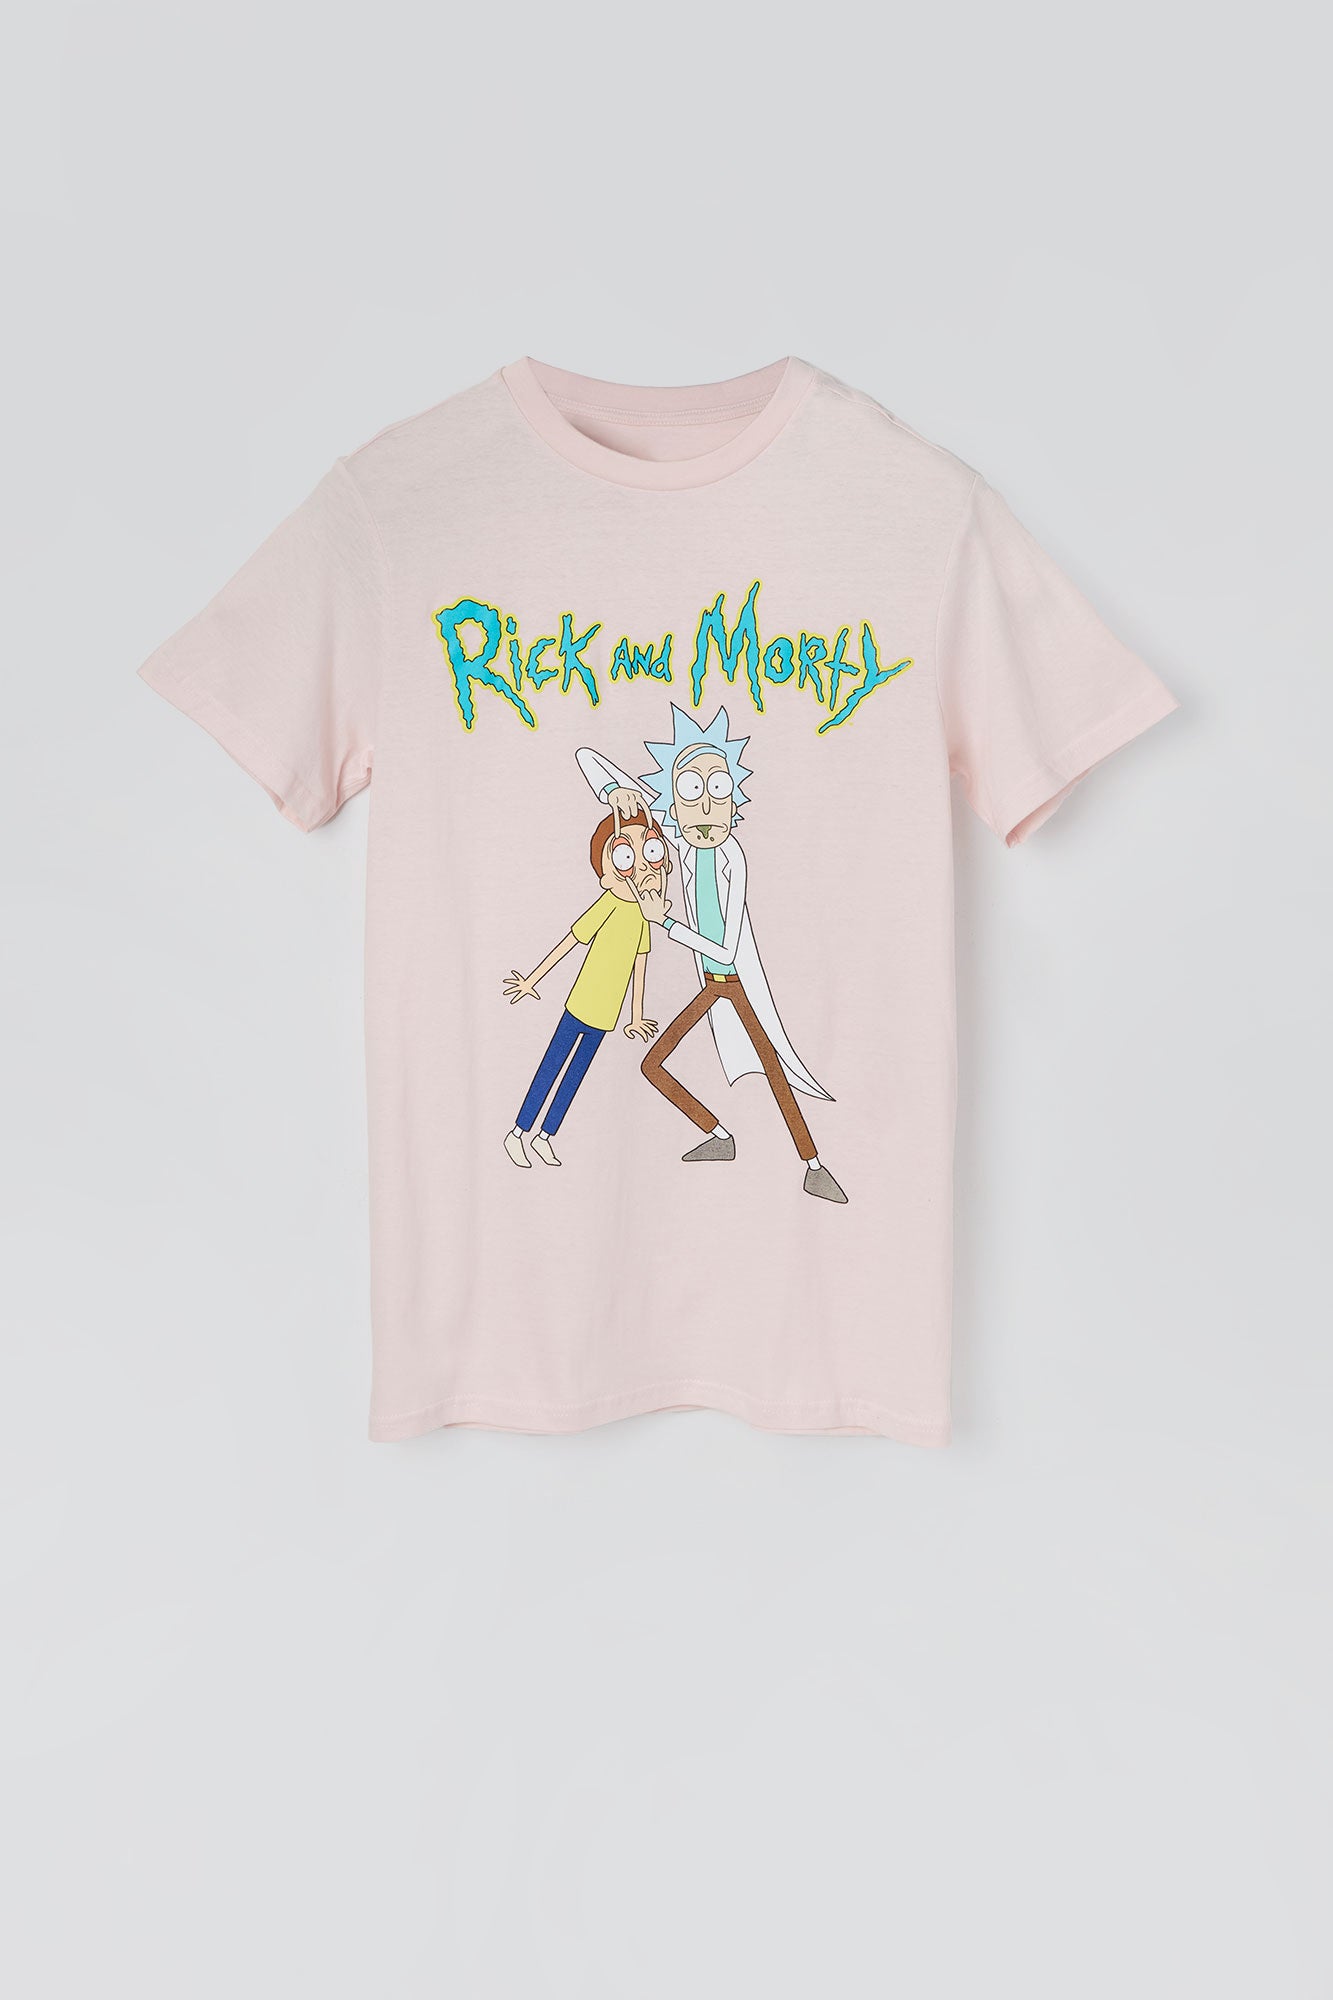 Rick and Morty Graphic T-Shirt